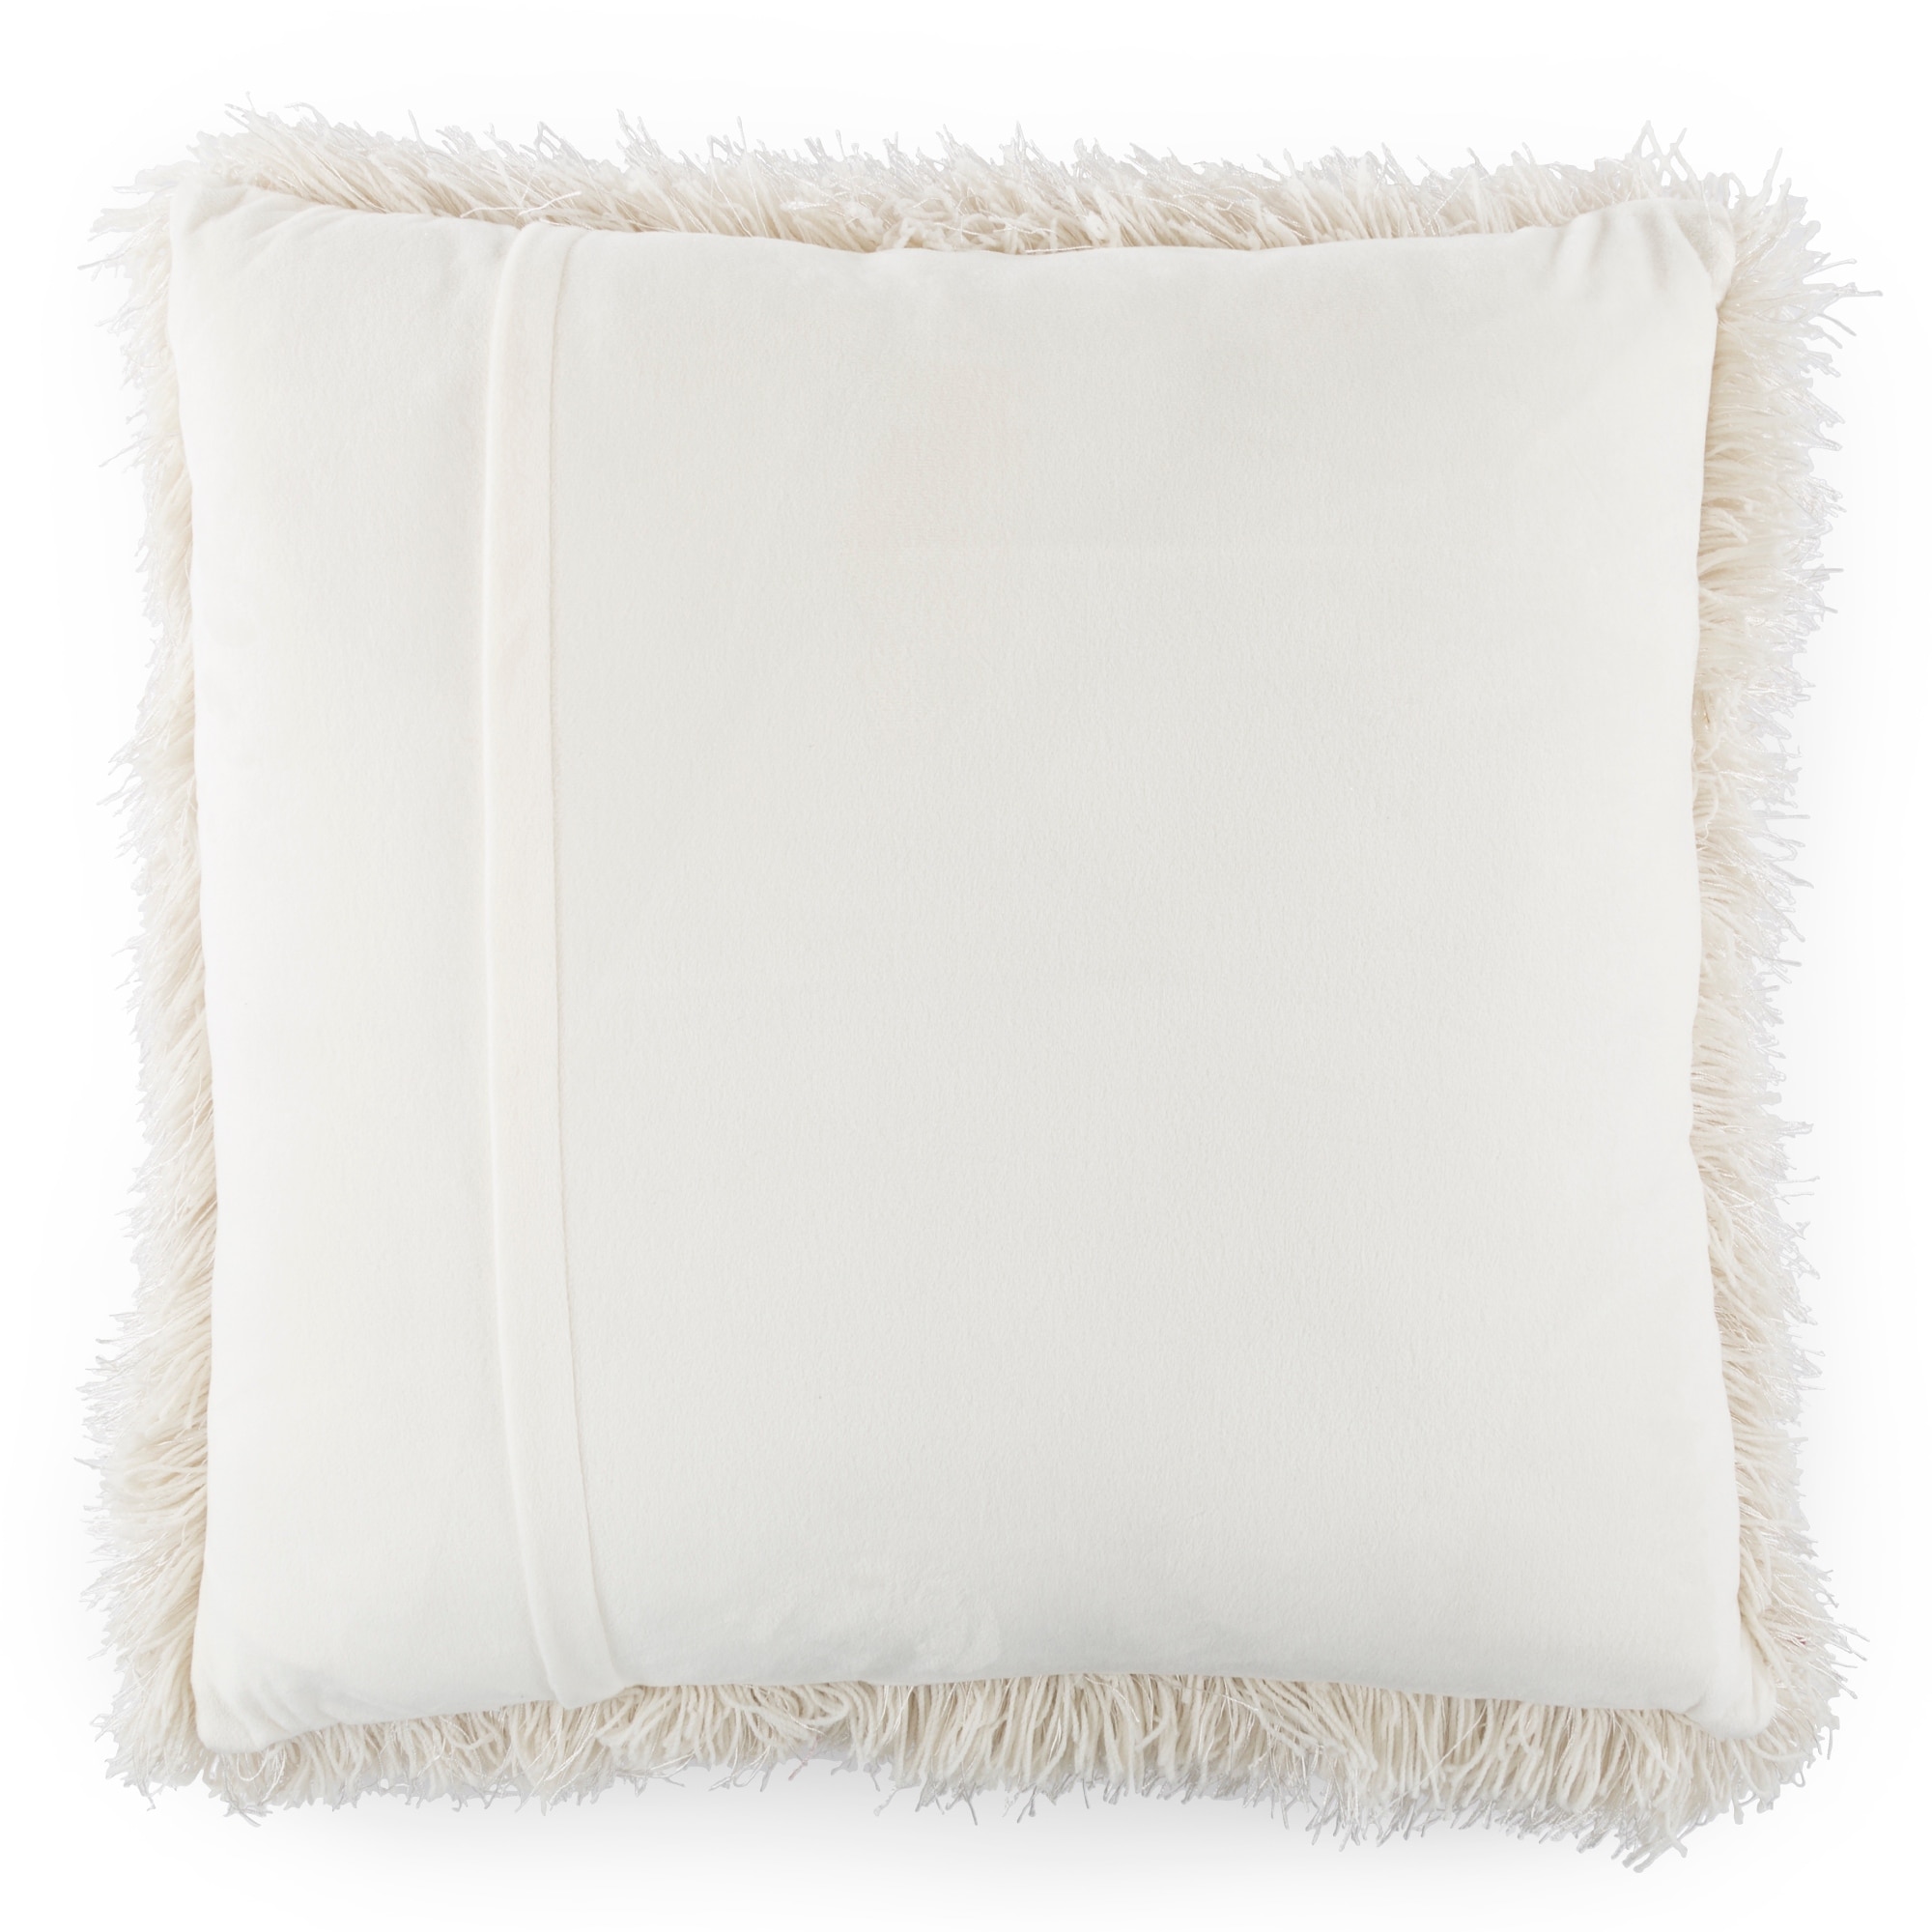 https://ak1.ostkcdn.com/images/products/is/images/direct/f97b413124307ea78356d31f213f4e8f0ba4f51c/Oversized-Floor-or-Throw-Pillow-Square-Shag-FauxFur-by-Windsor-Home.jpg